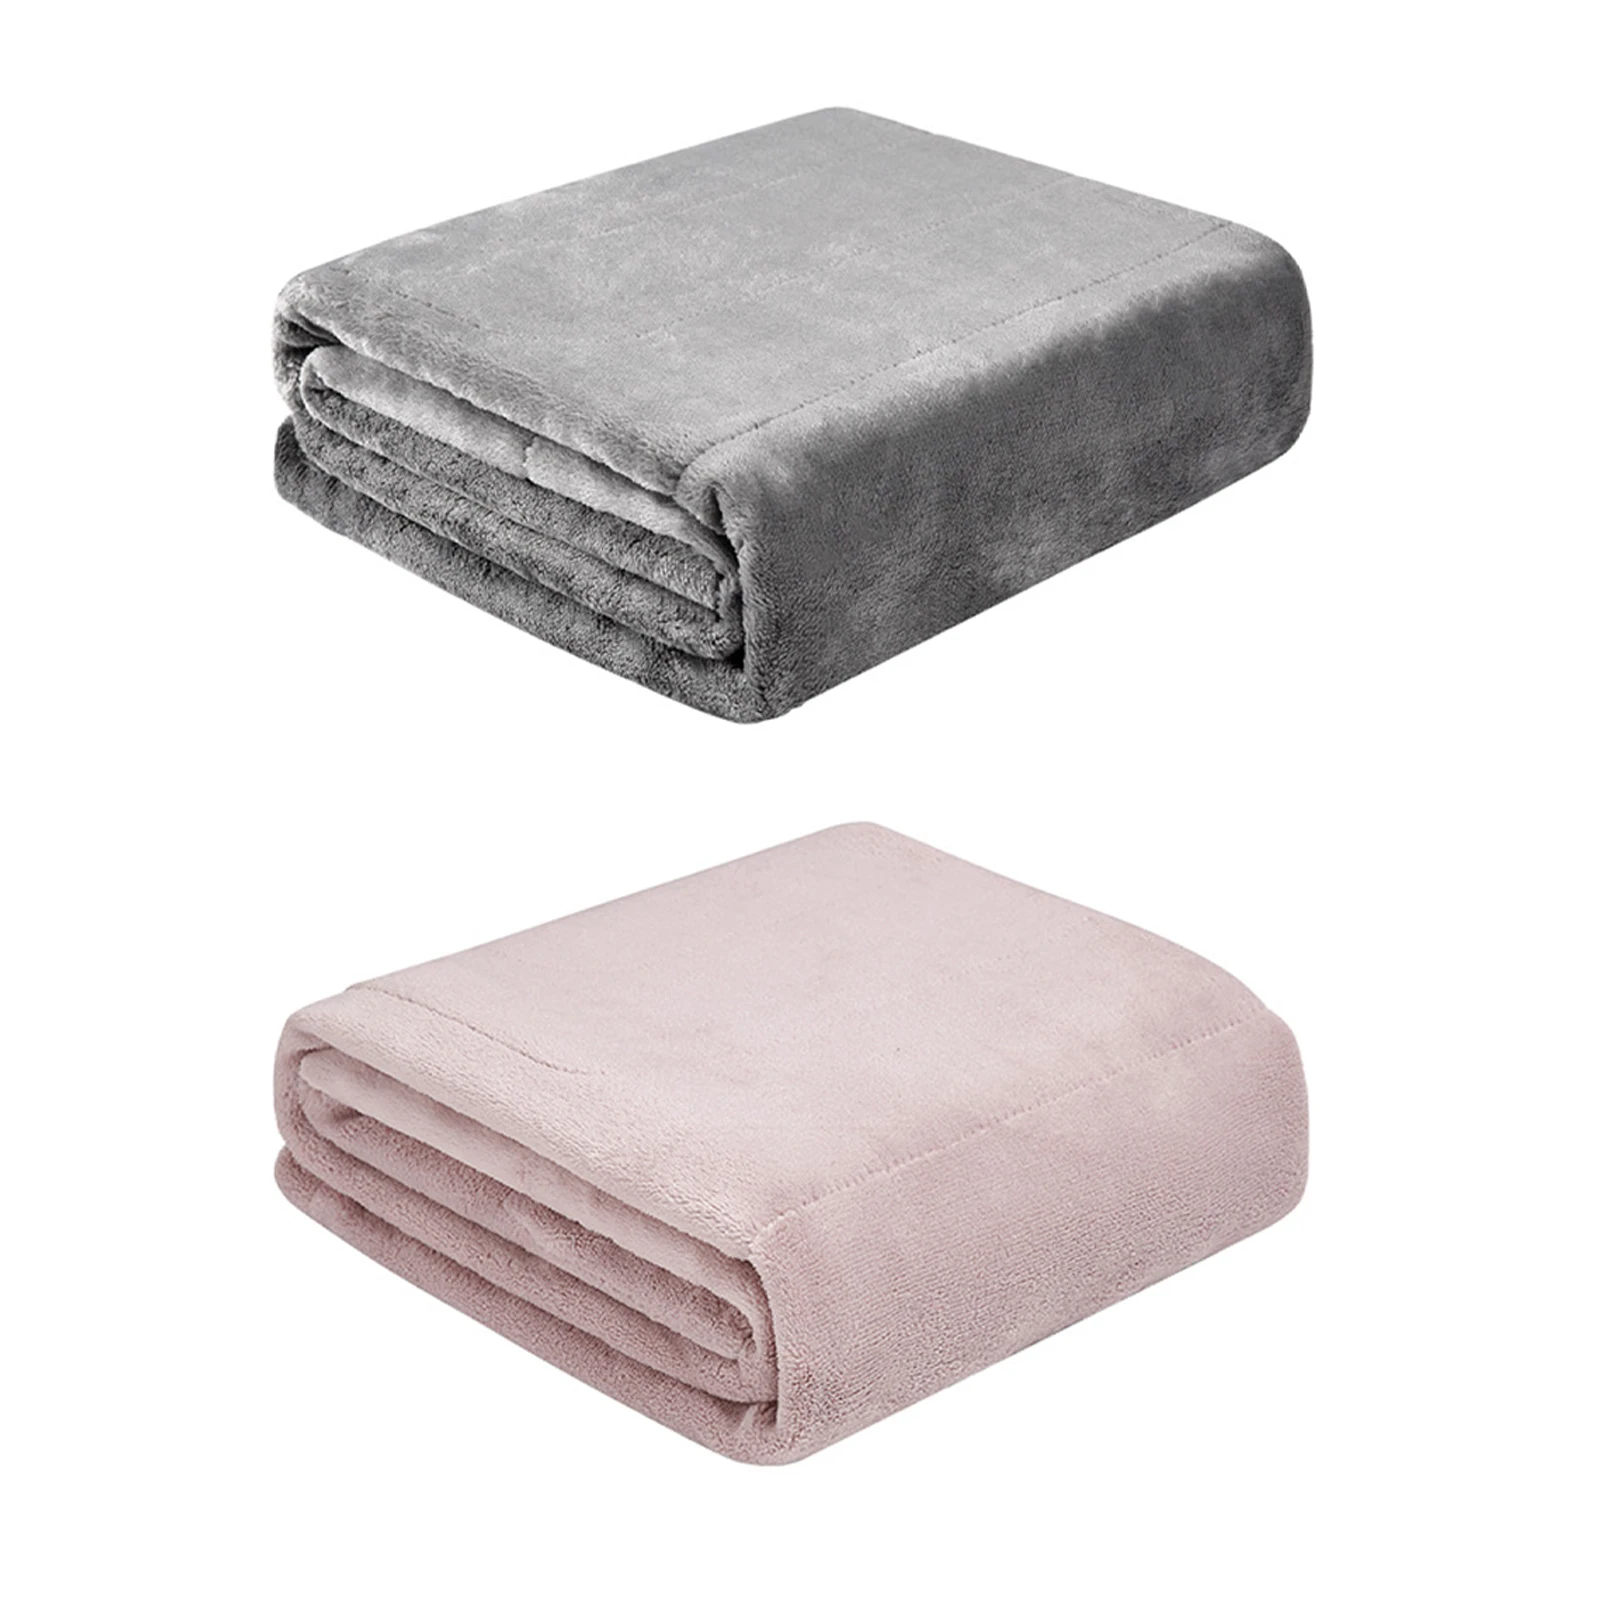 

Electric Blanket 5V 2A USB Thicker Heater 60x40cm Body Warmer Heated Blanket Mattress Thermostat Electric Heating Blanket